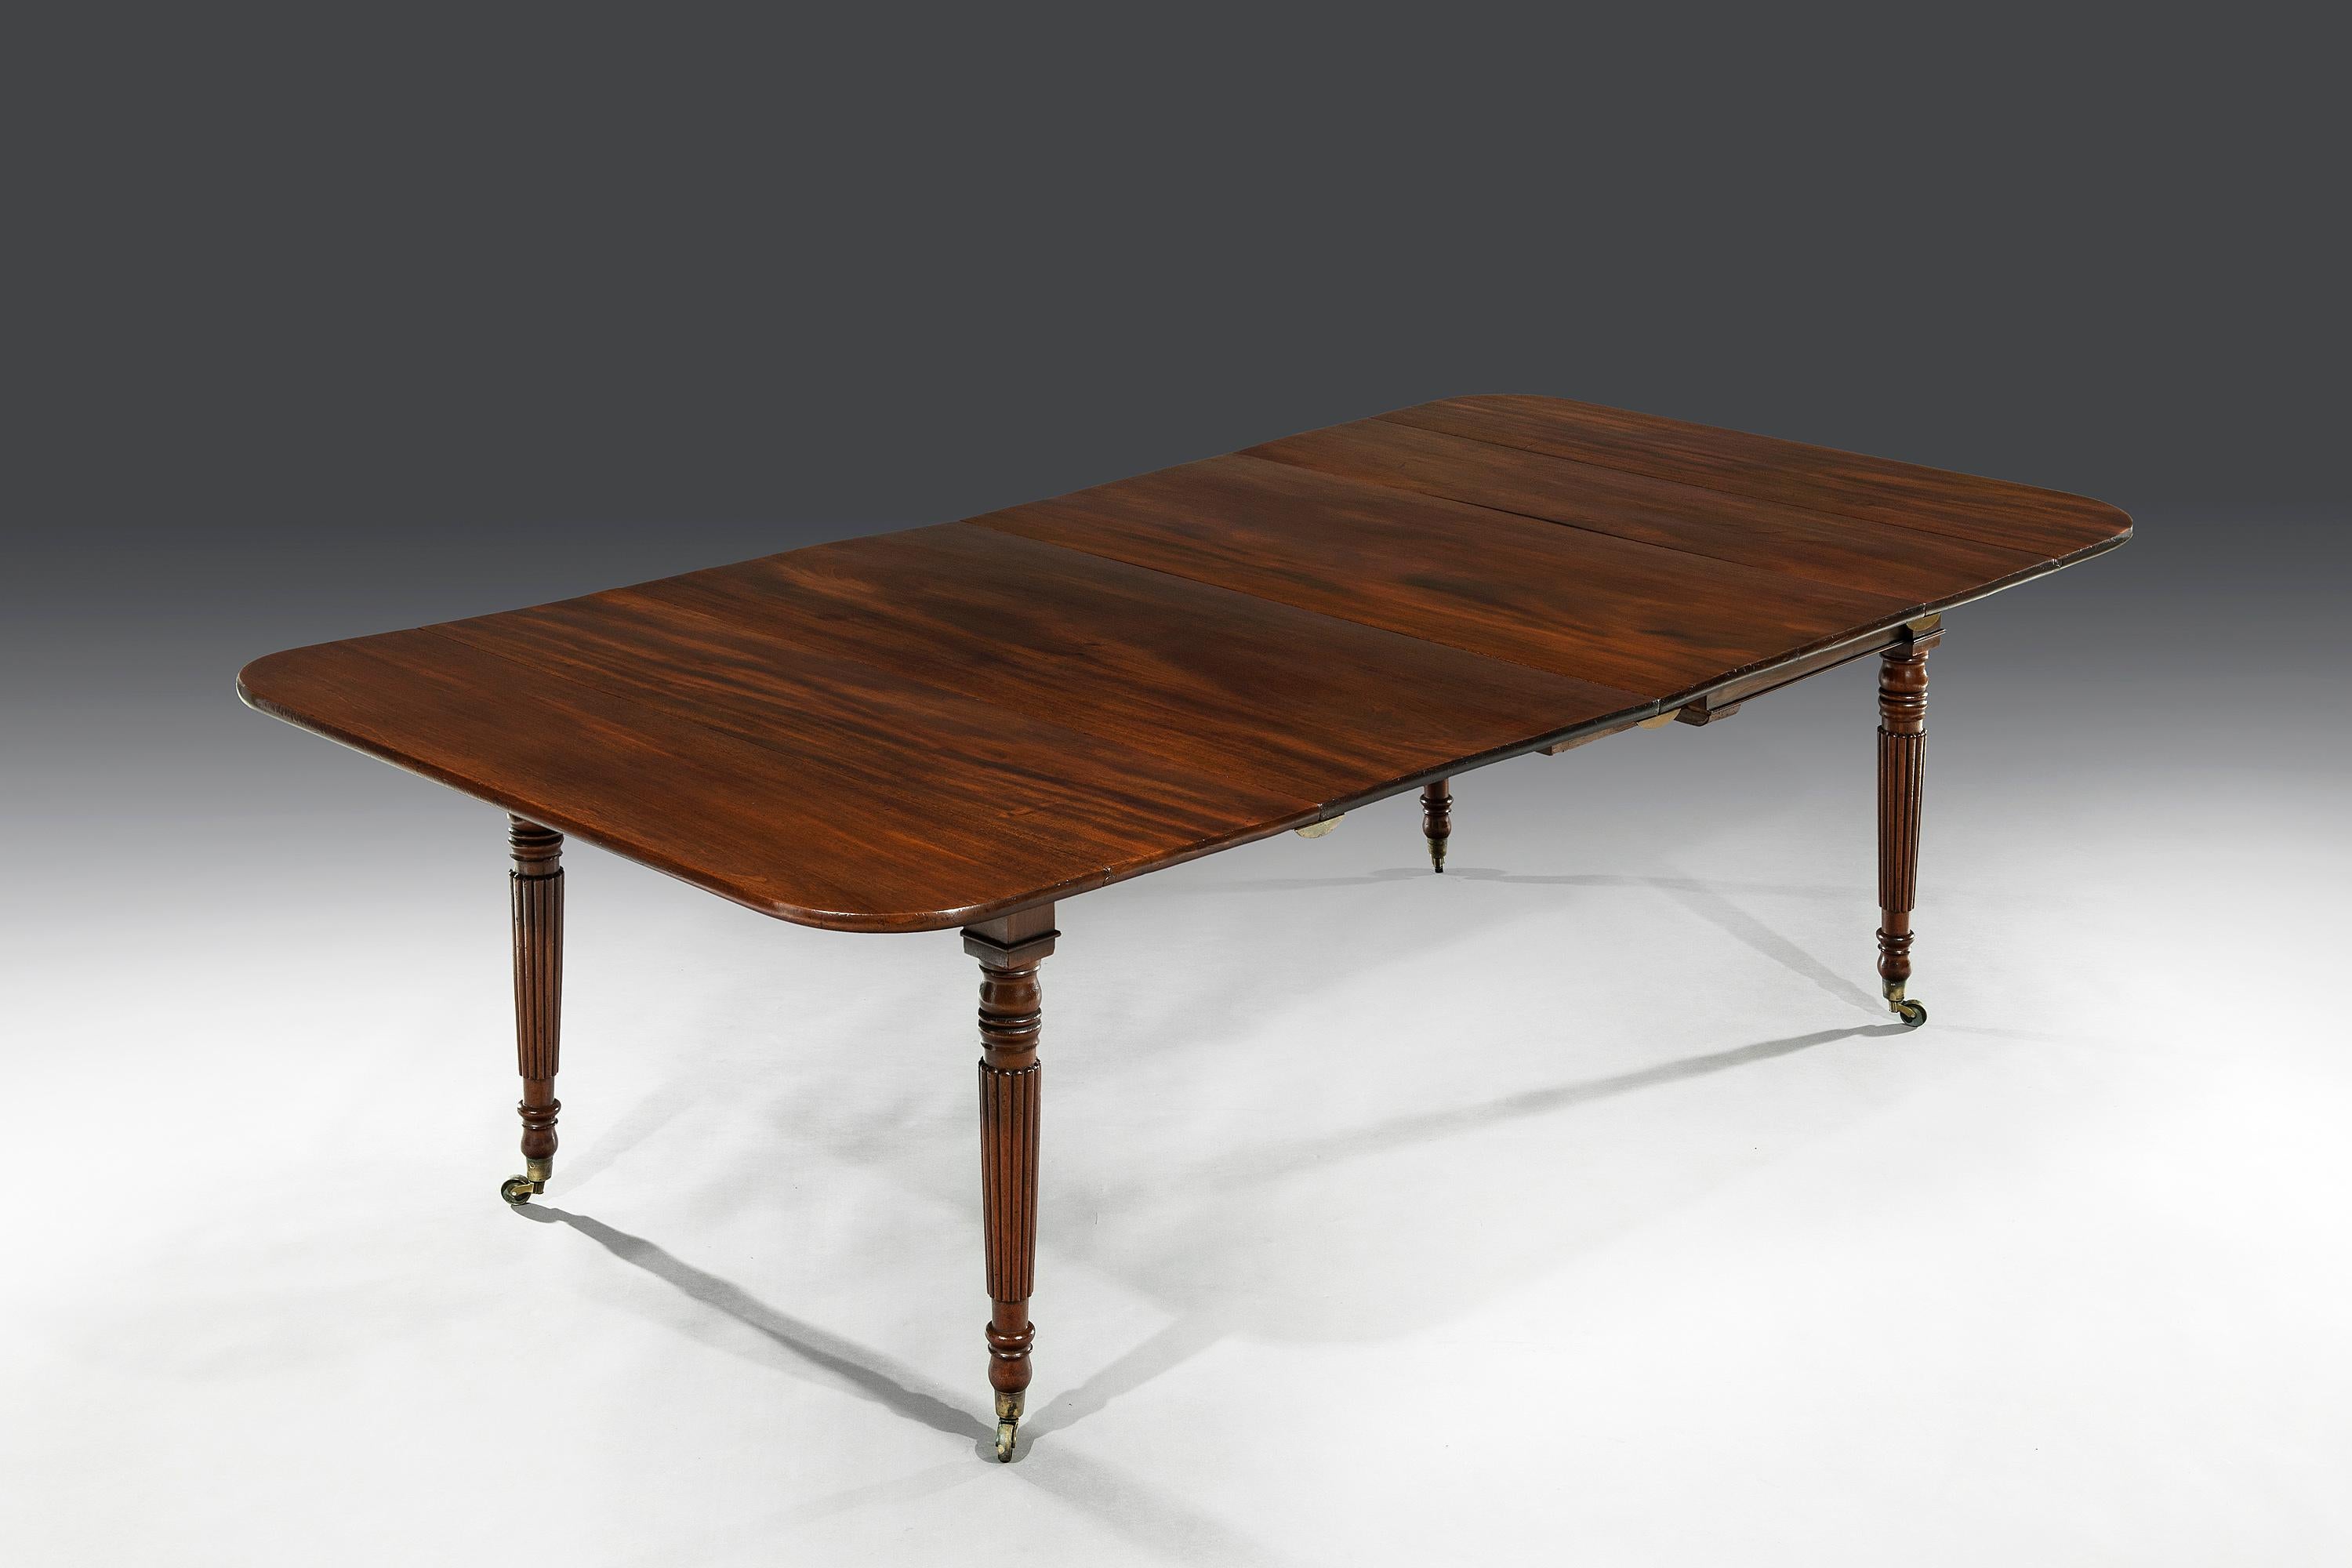 Early 19th Century Small George III Regency Period Mahogany Telescopic Action Dining Table